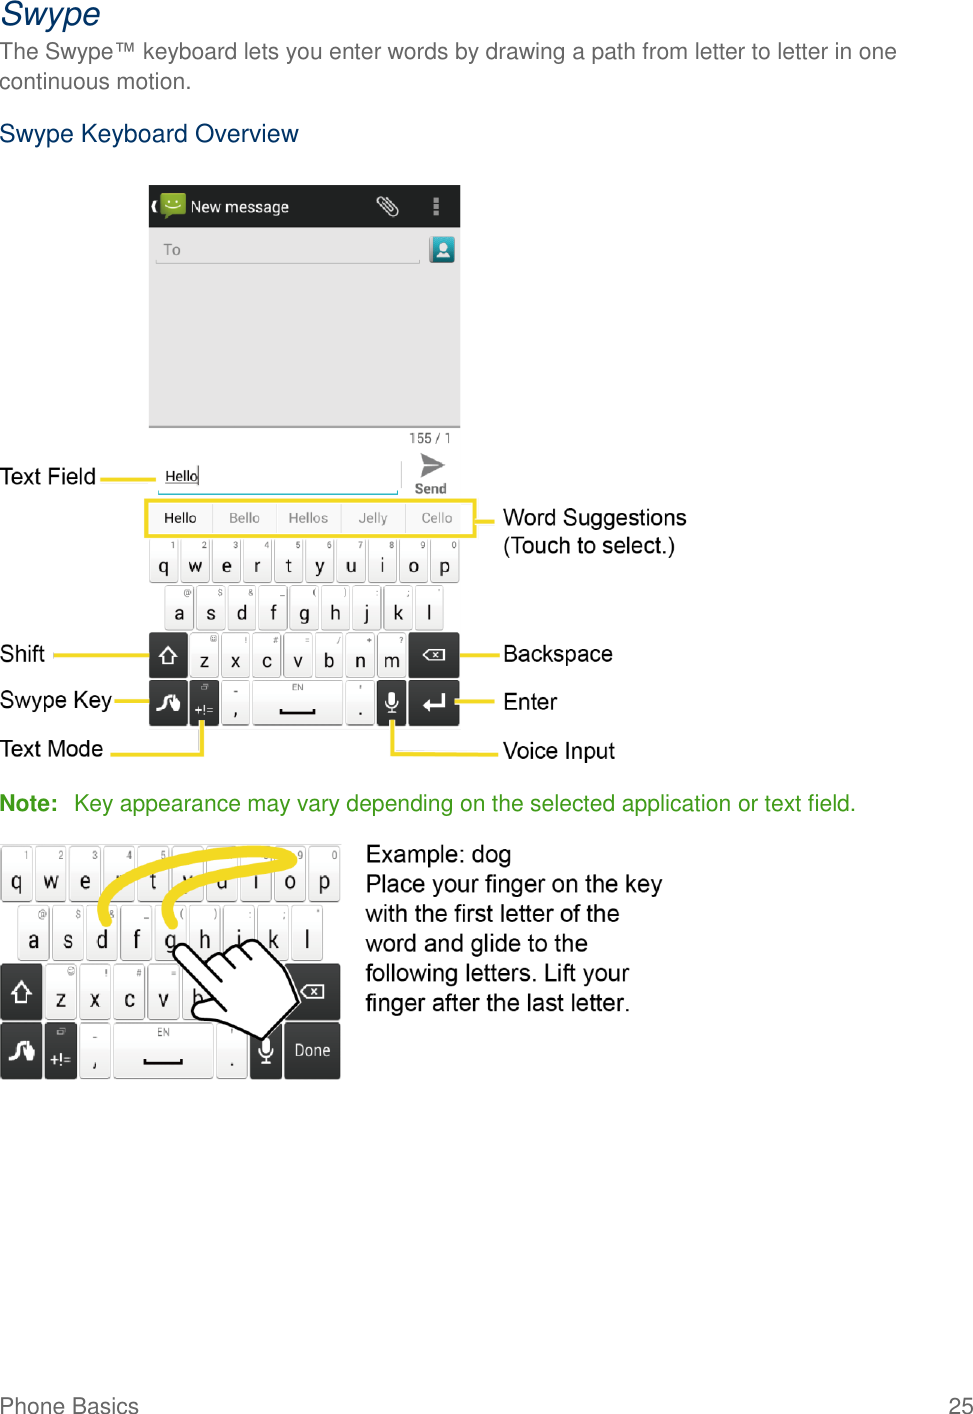 Phone Basics  25 Swype The Swype™ keyboard lets you enter words by drawing a path from letter to letter in one continuous motion.  Swype Keyboard Overview   Note:  Key appearance may vary depending on the selected application or text field.  